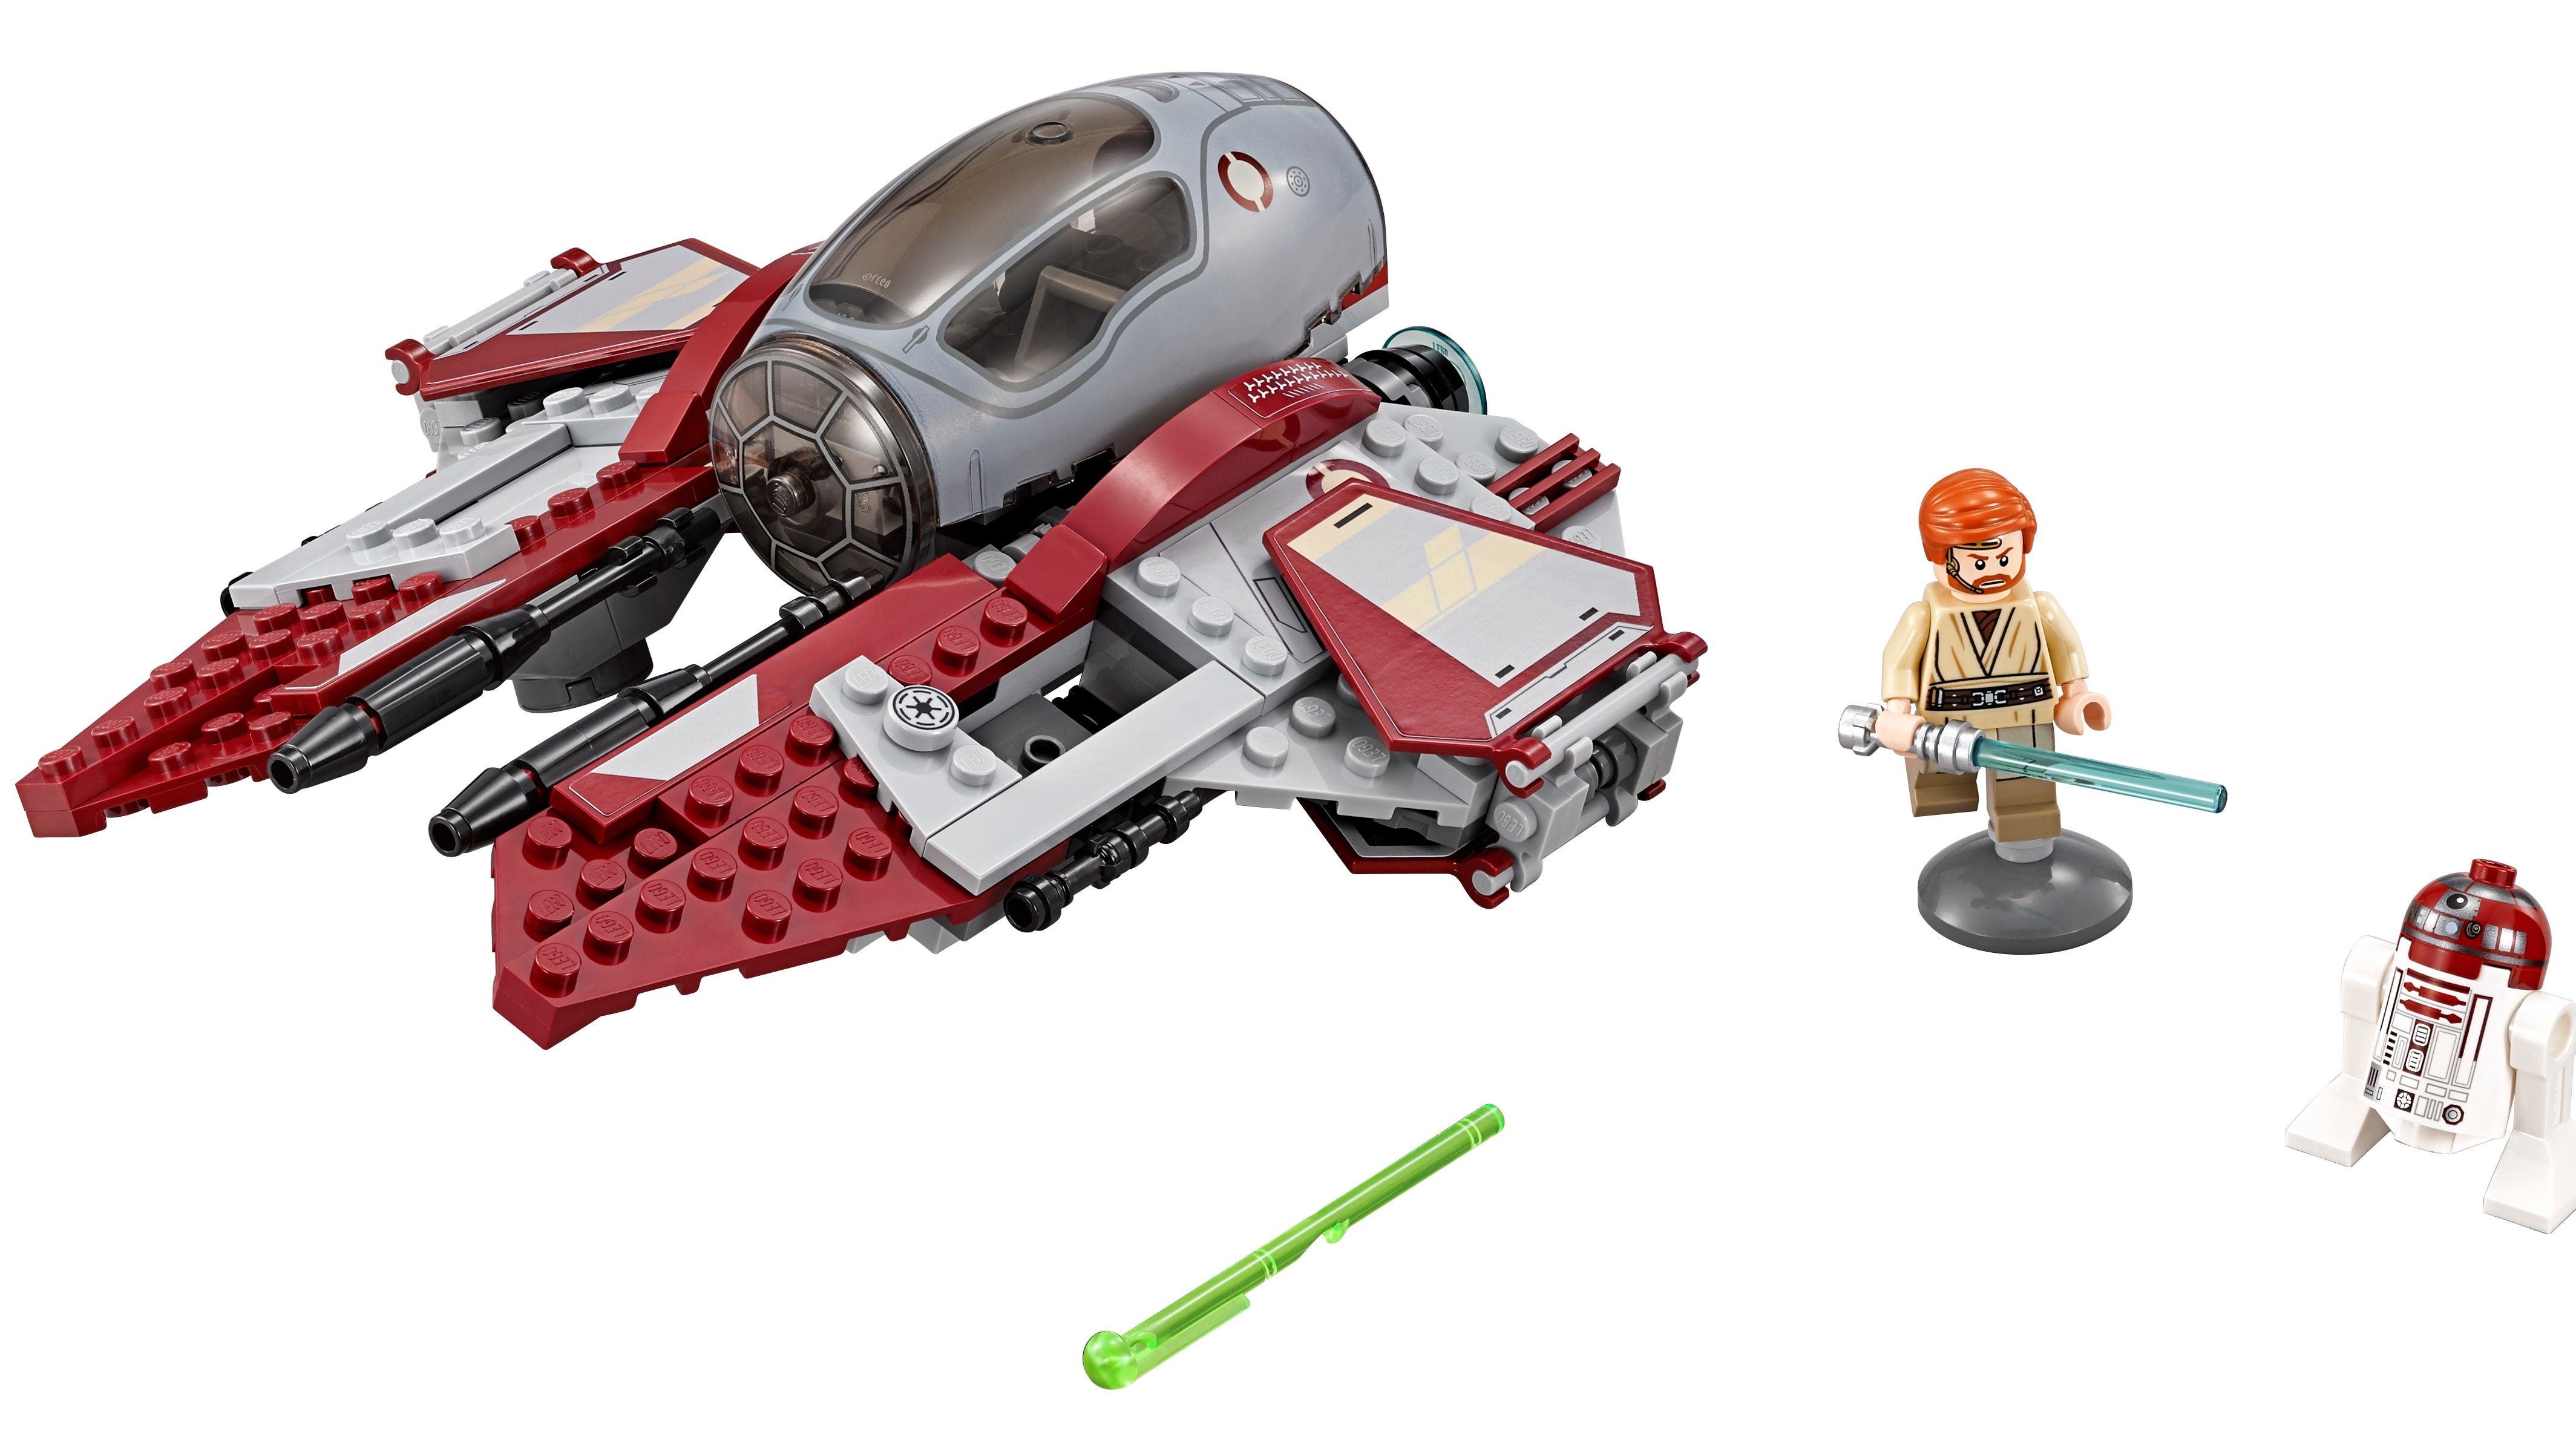 Tæl op hjort Phobia Want the new Star Wars LEGO sets? Here's where you can find them